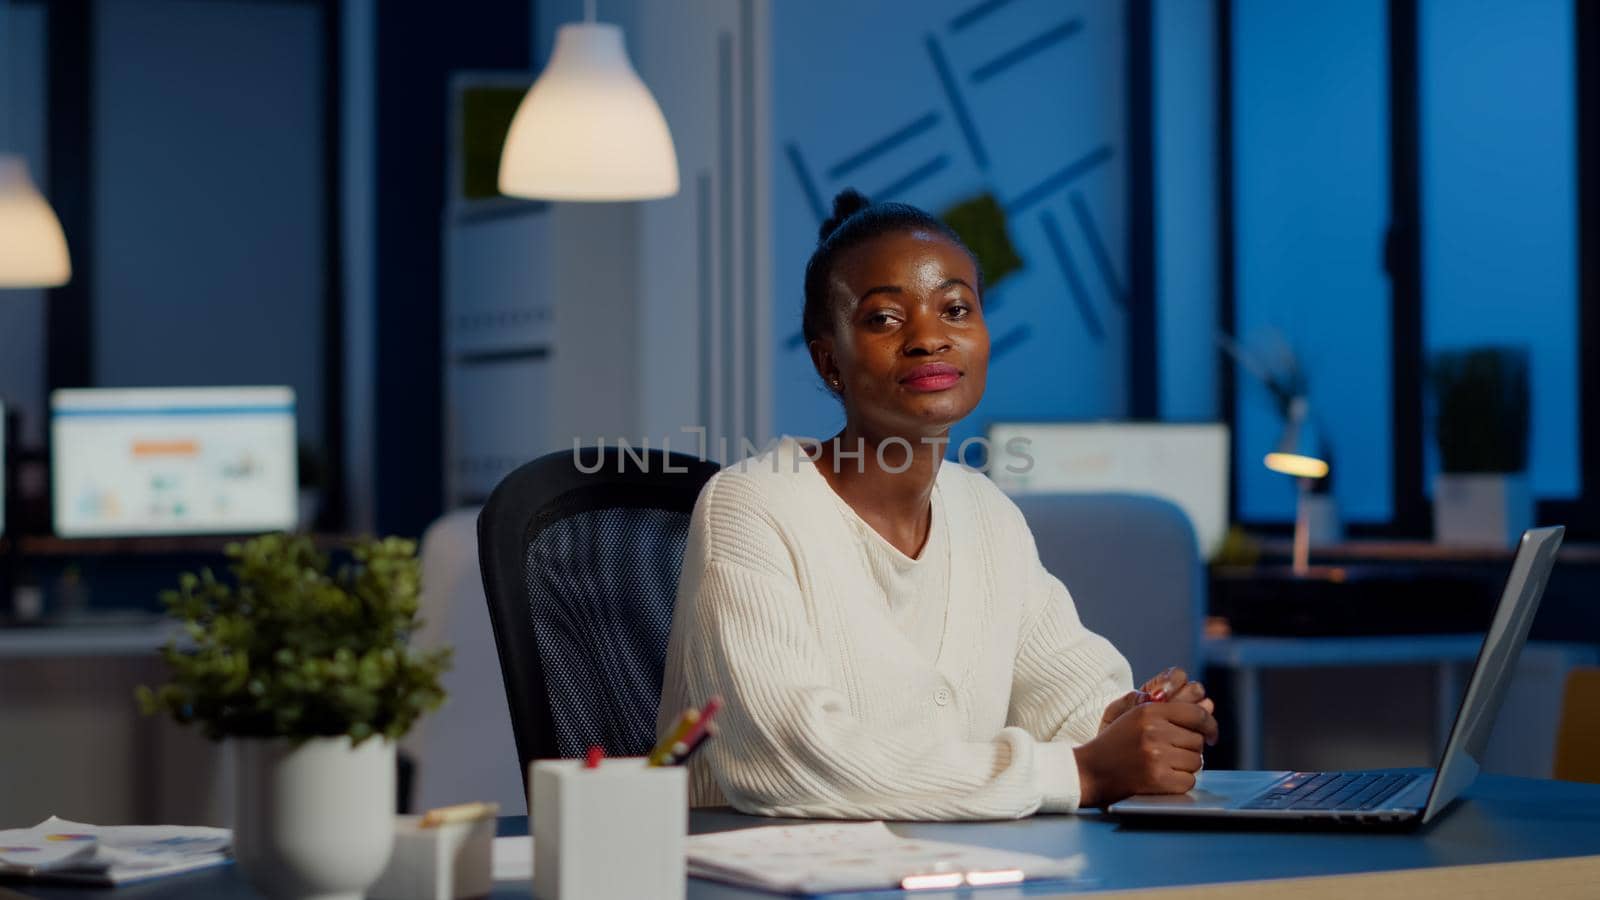 Tired black woman manager looking at camera sighing after typing on laptop, working late at night in start-up financial business office. Focused employee doing overtime respecting deadline of project